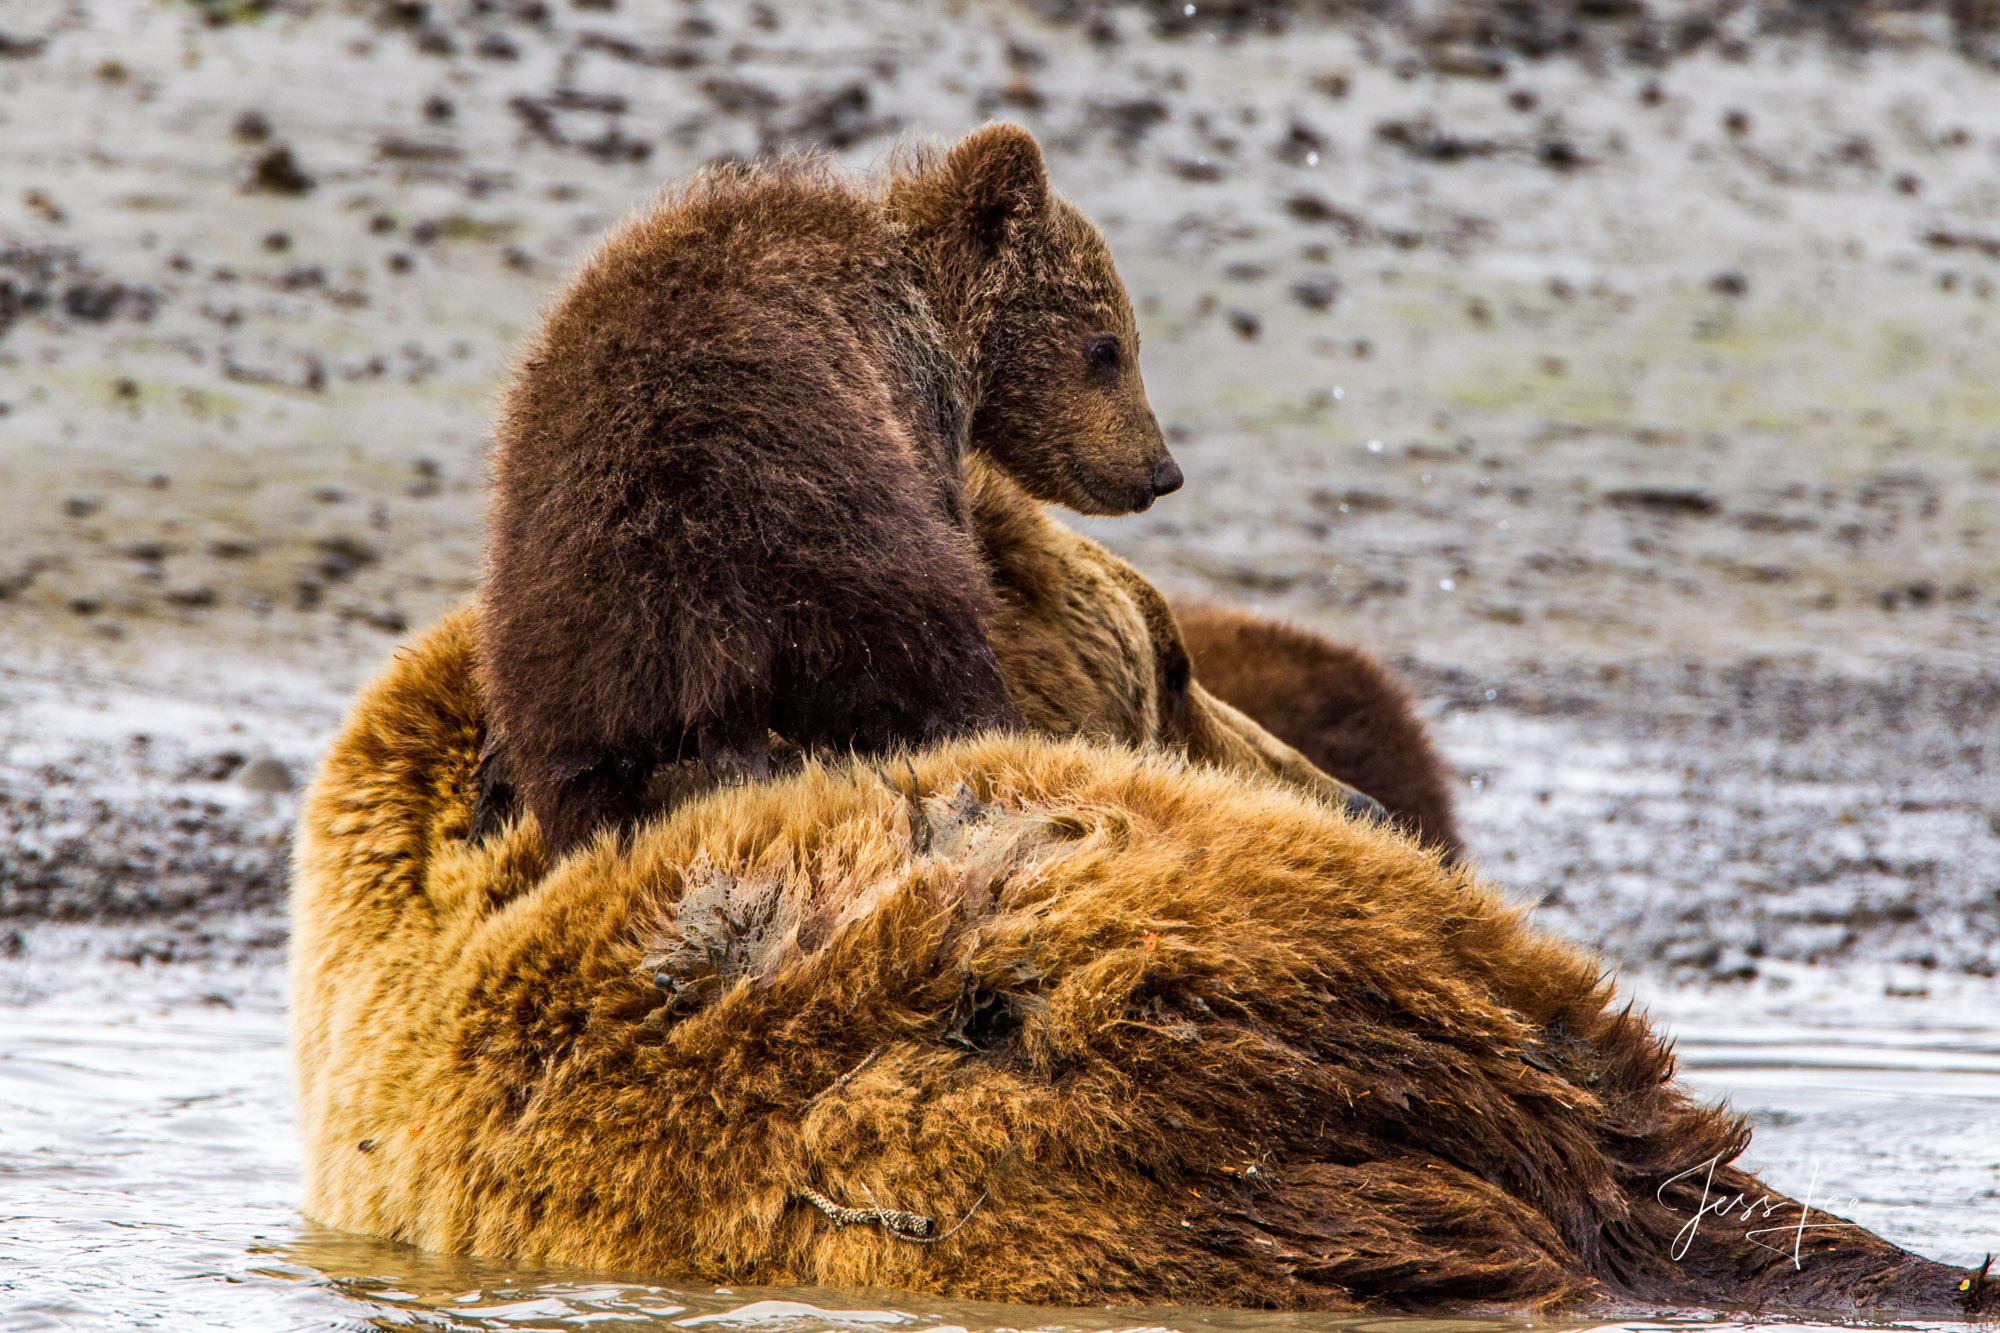 Alaska Grizzly cub setting on mom a, Limited Edition of 800 prints. These Grizzly bear fine art wildlife photographs are offered...